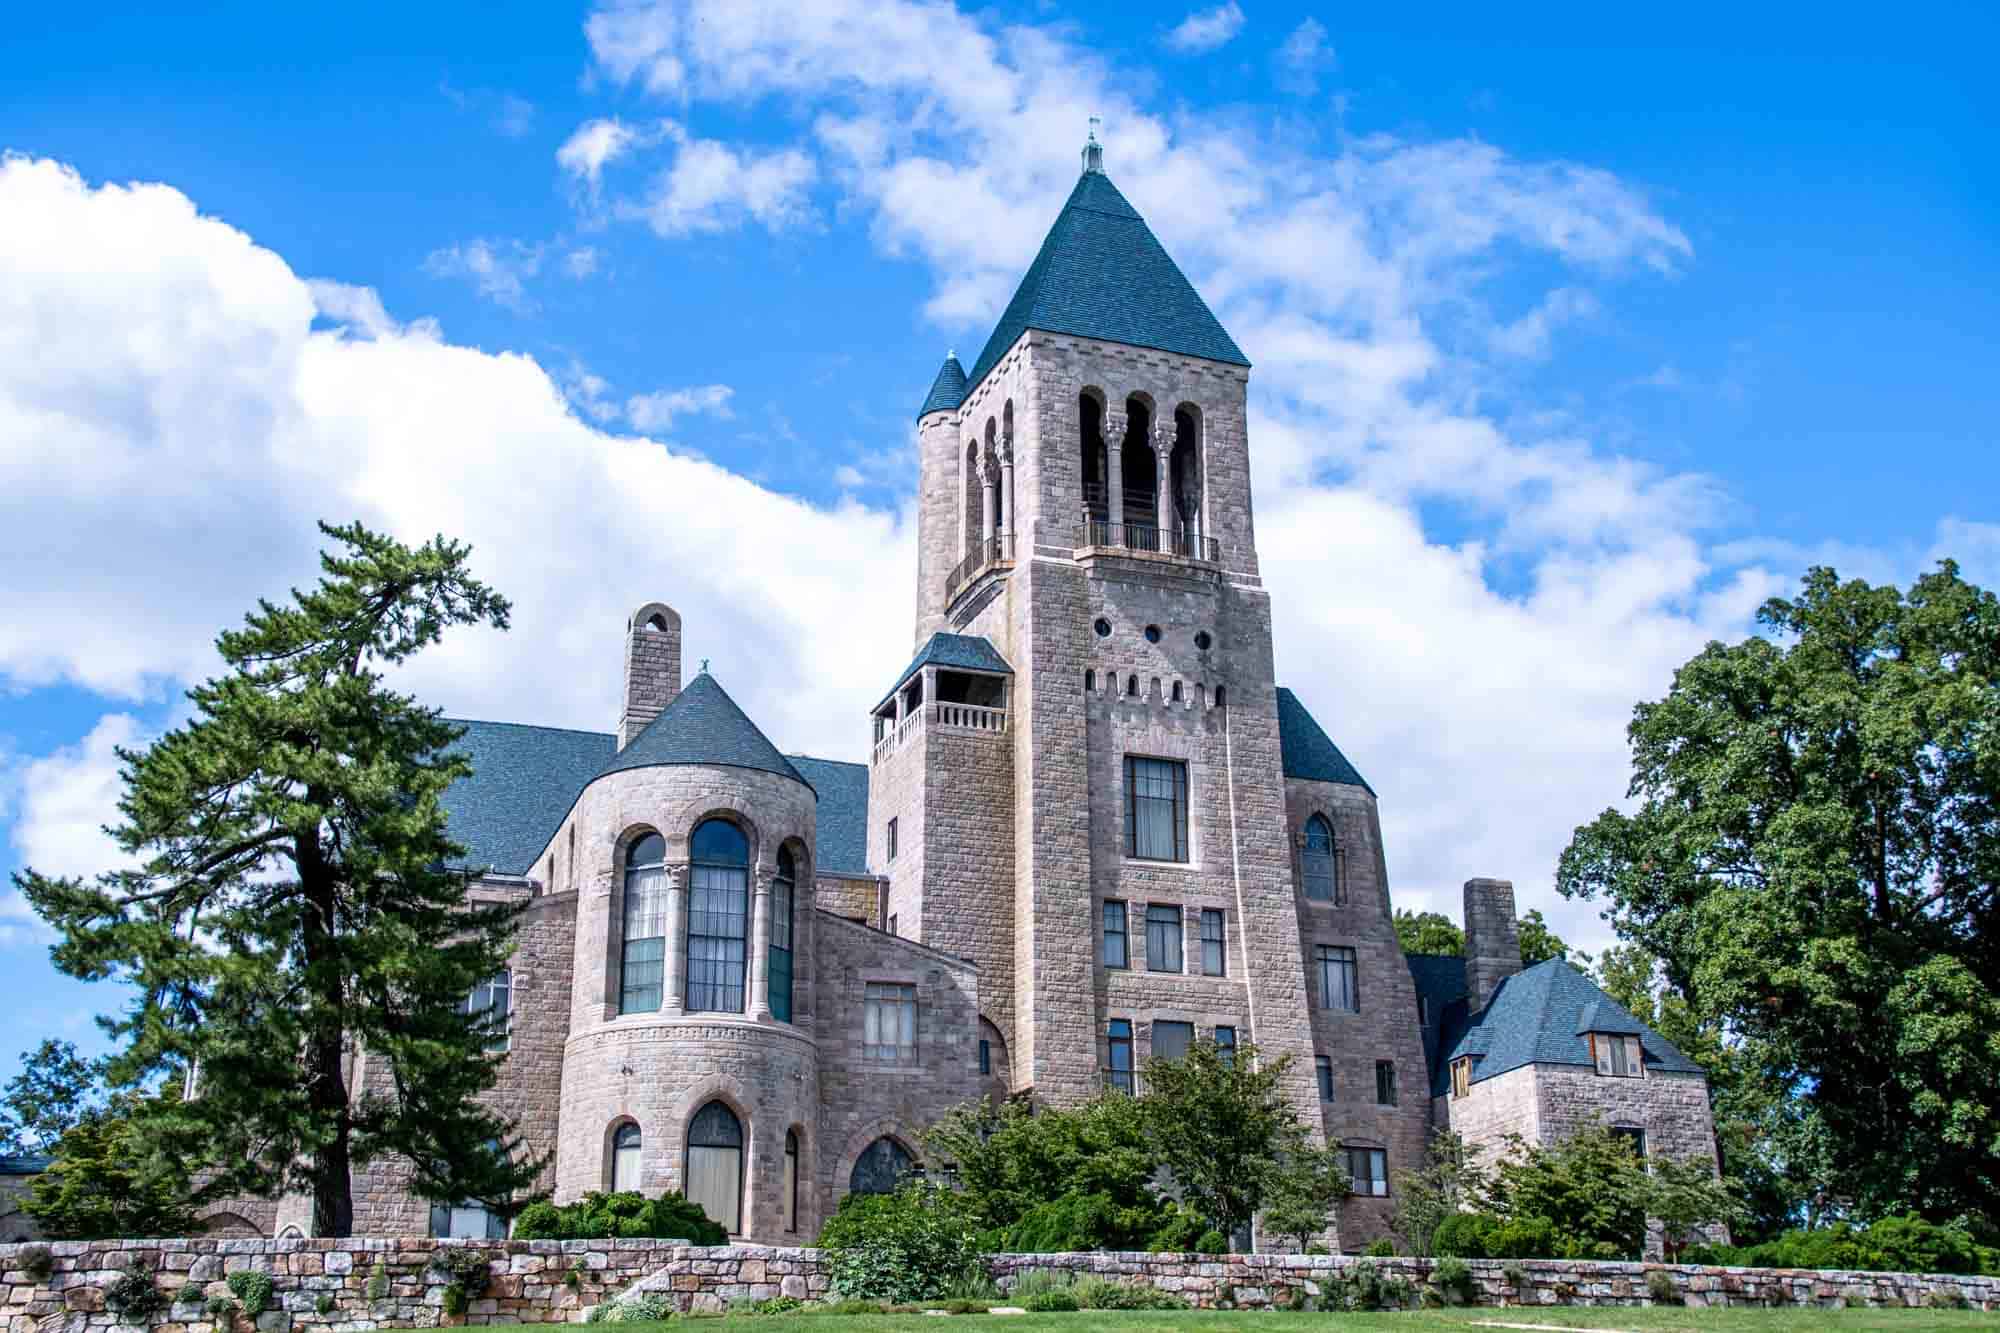 Granite mansion with a gray roof and 9-story tower